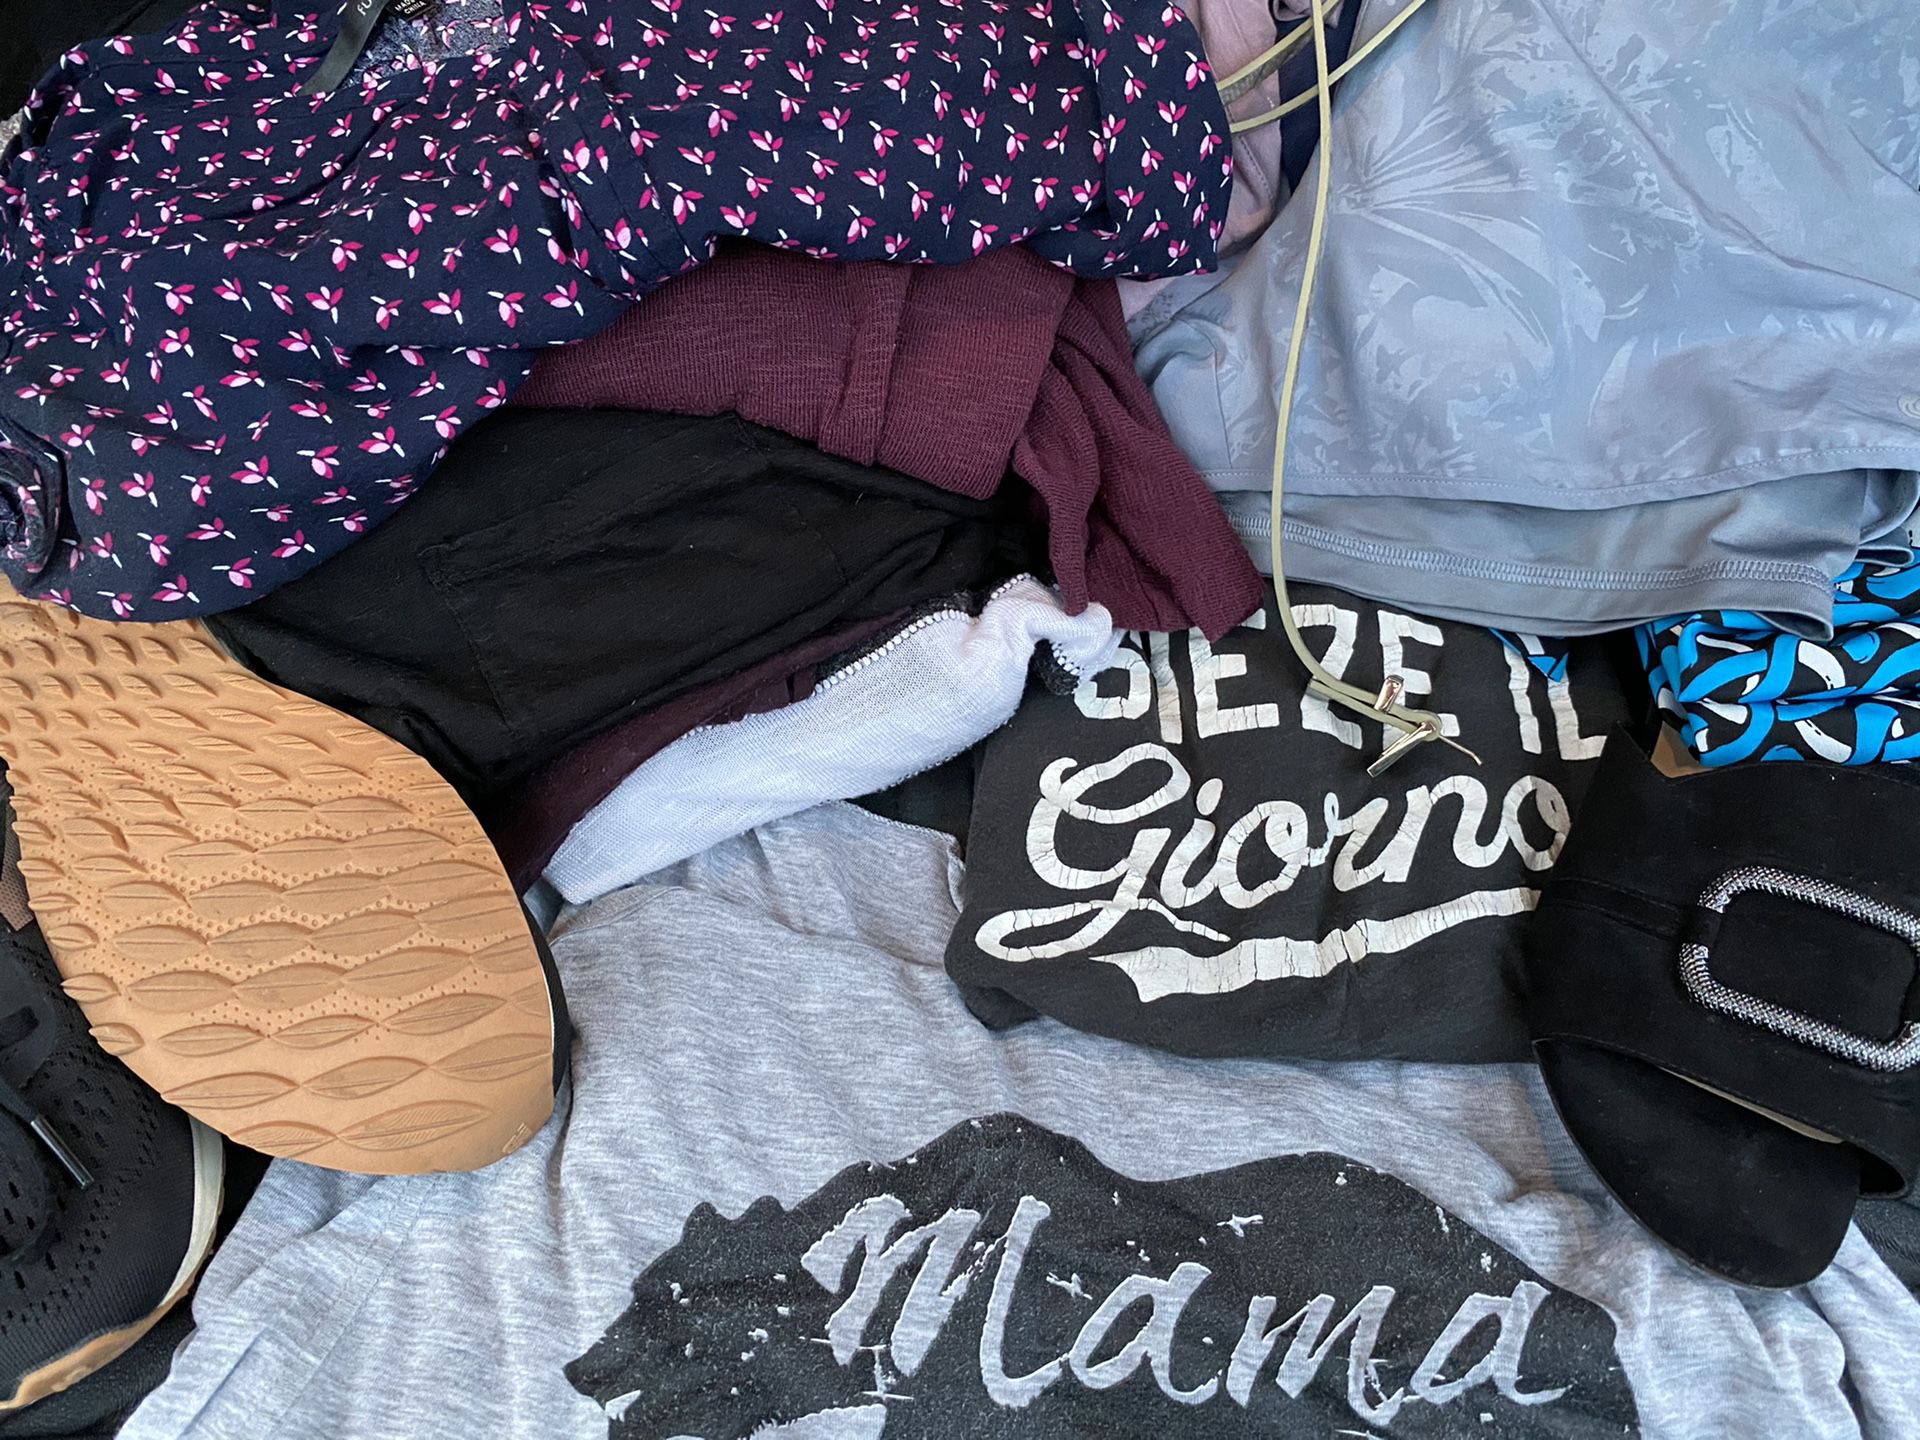 Women’s name brand lot of clothes